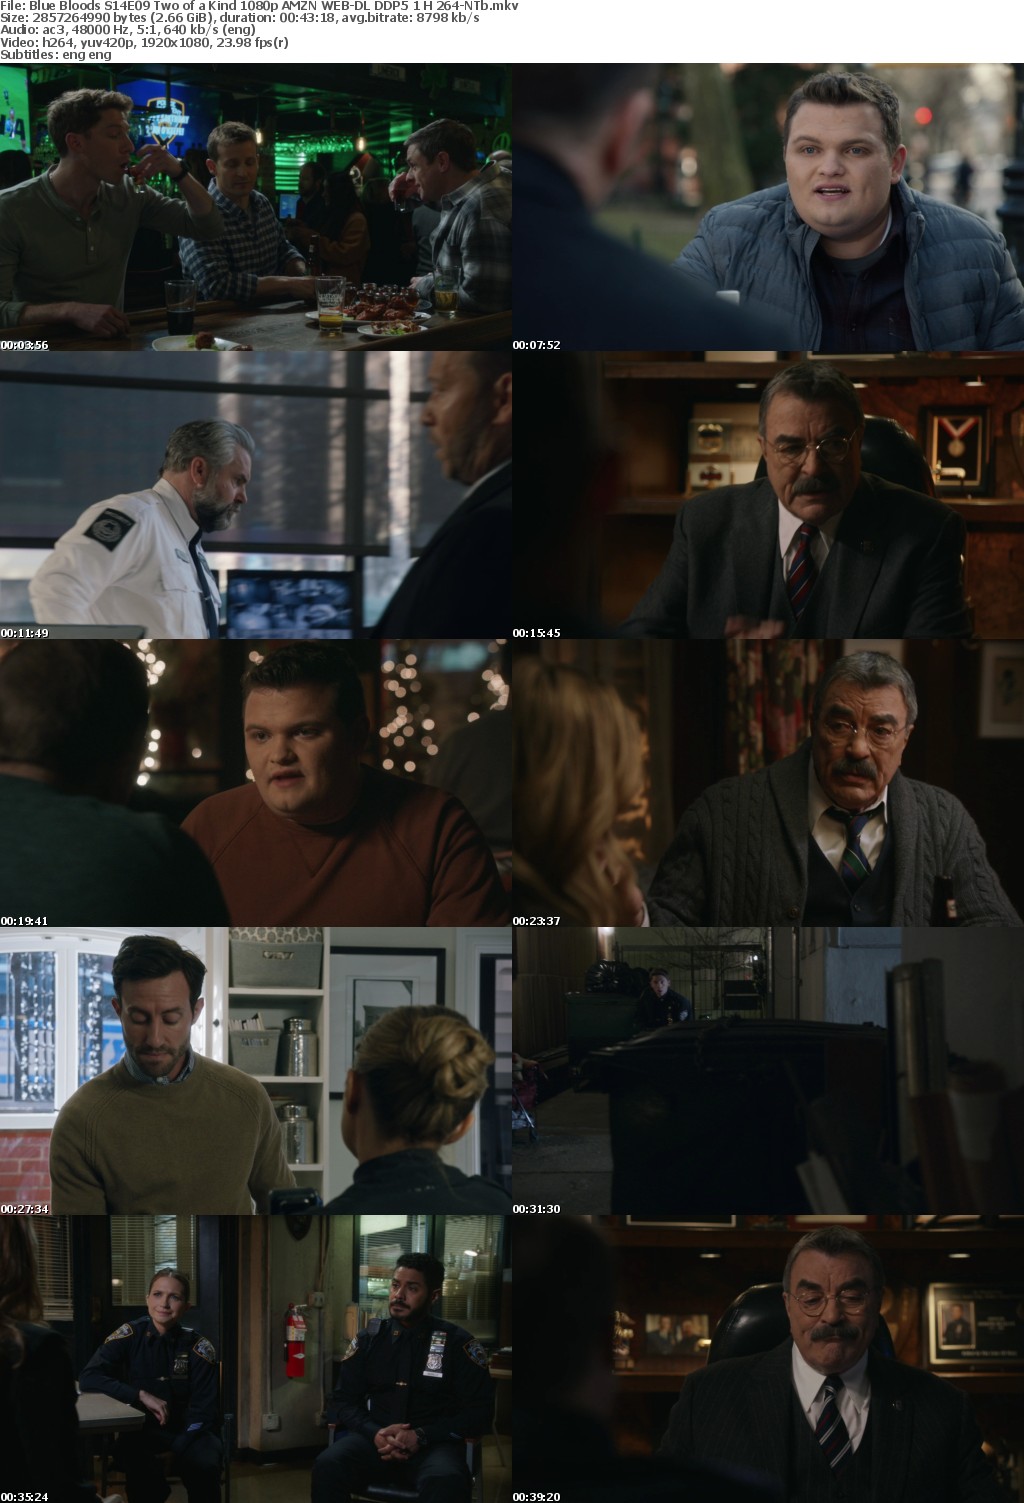 Blue Bloods S14E09 Two of a Kind 1080p AMZN WEB-DL DDP5 1 H 264-NTb